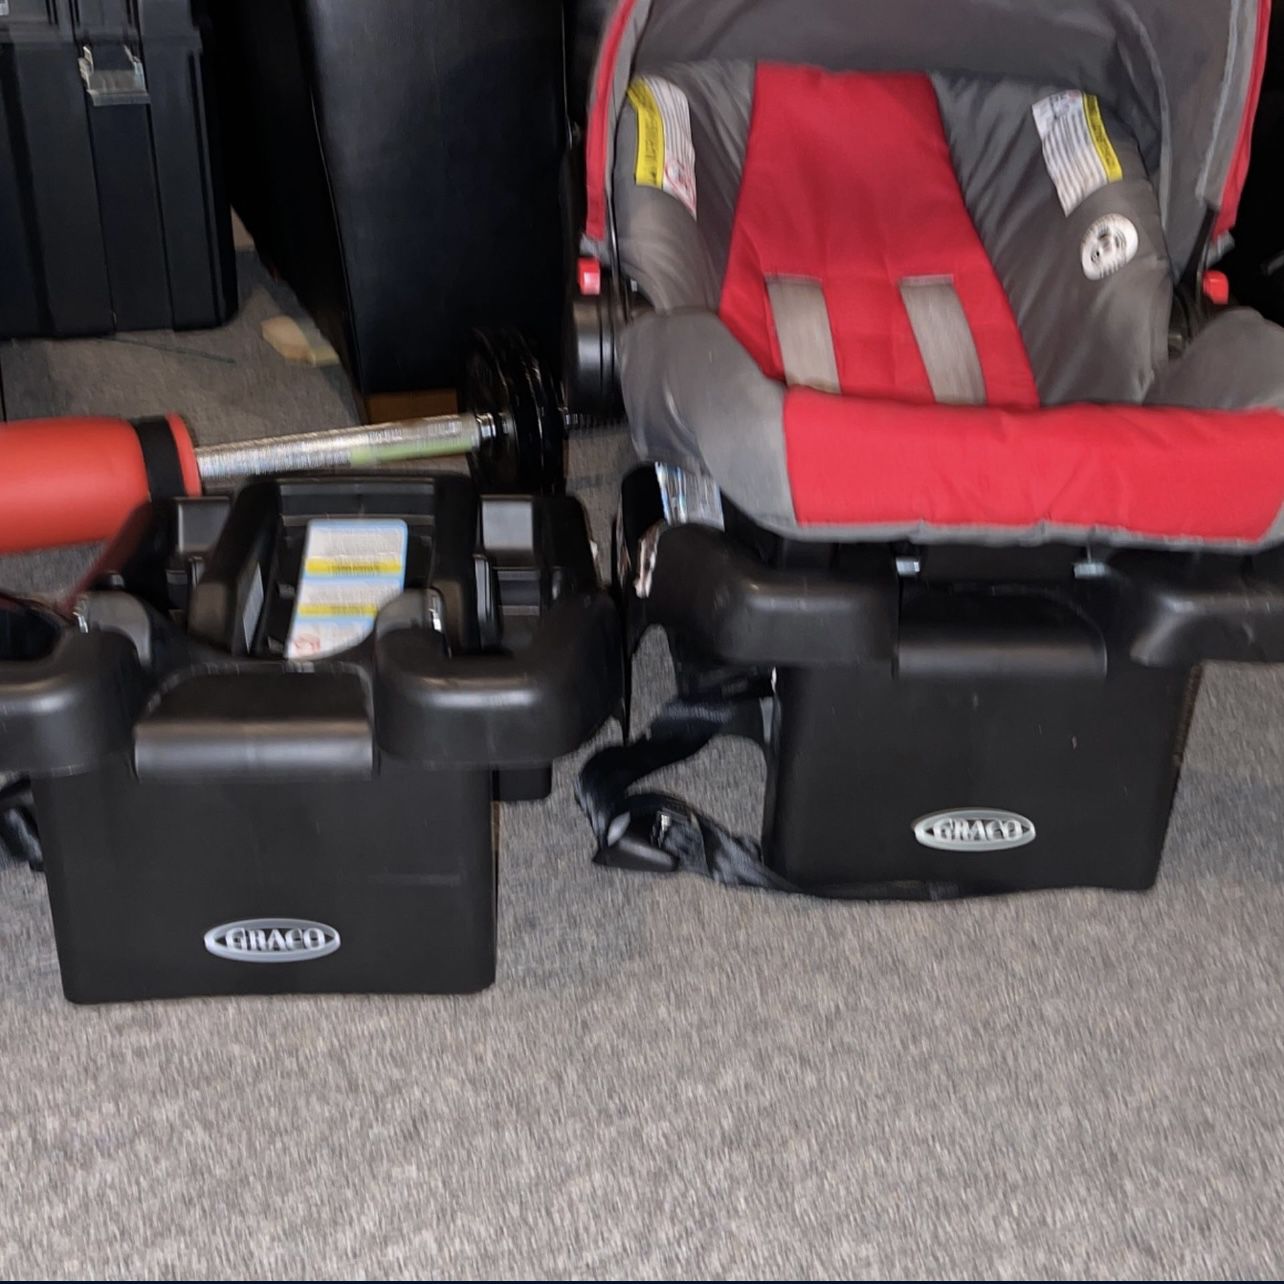 GRACO Car Seat And Two Bases